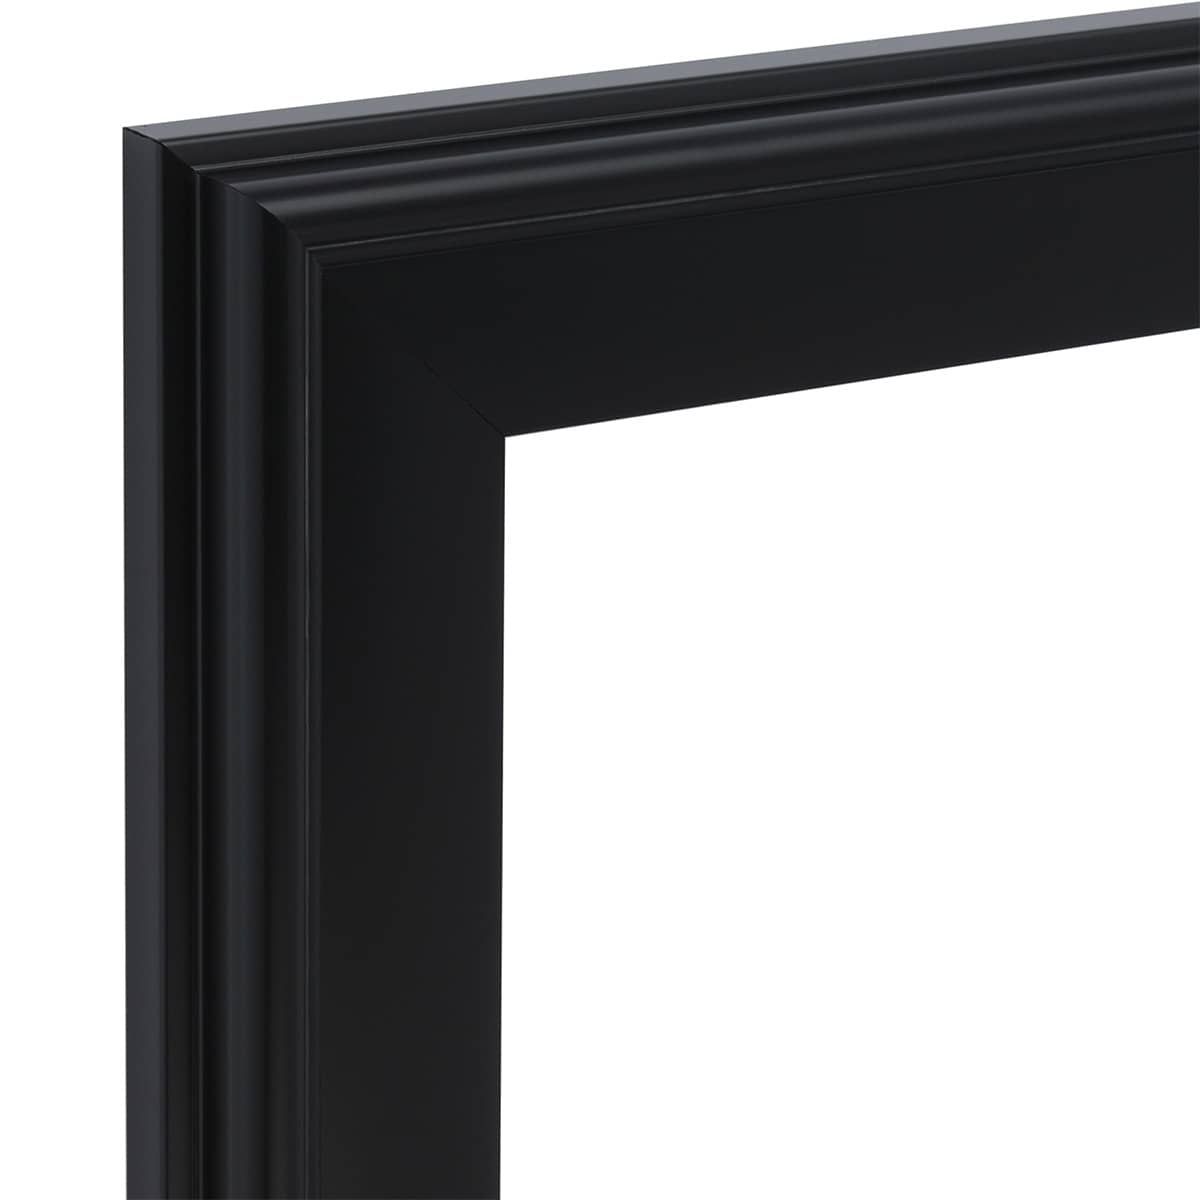 front of the frame has a smooth, blemish-free surface